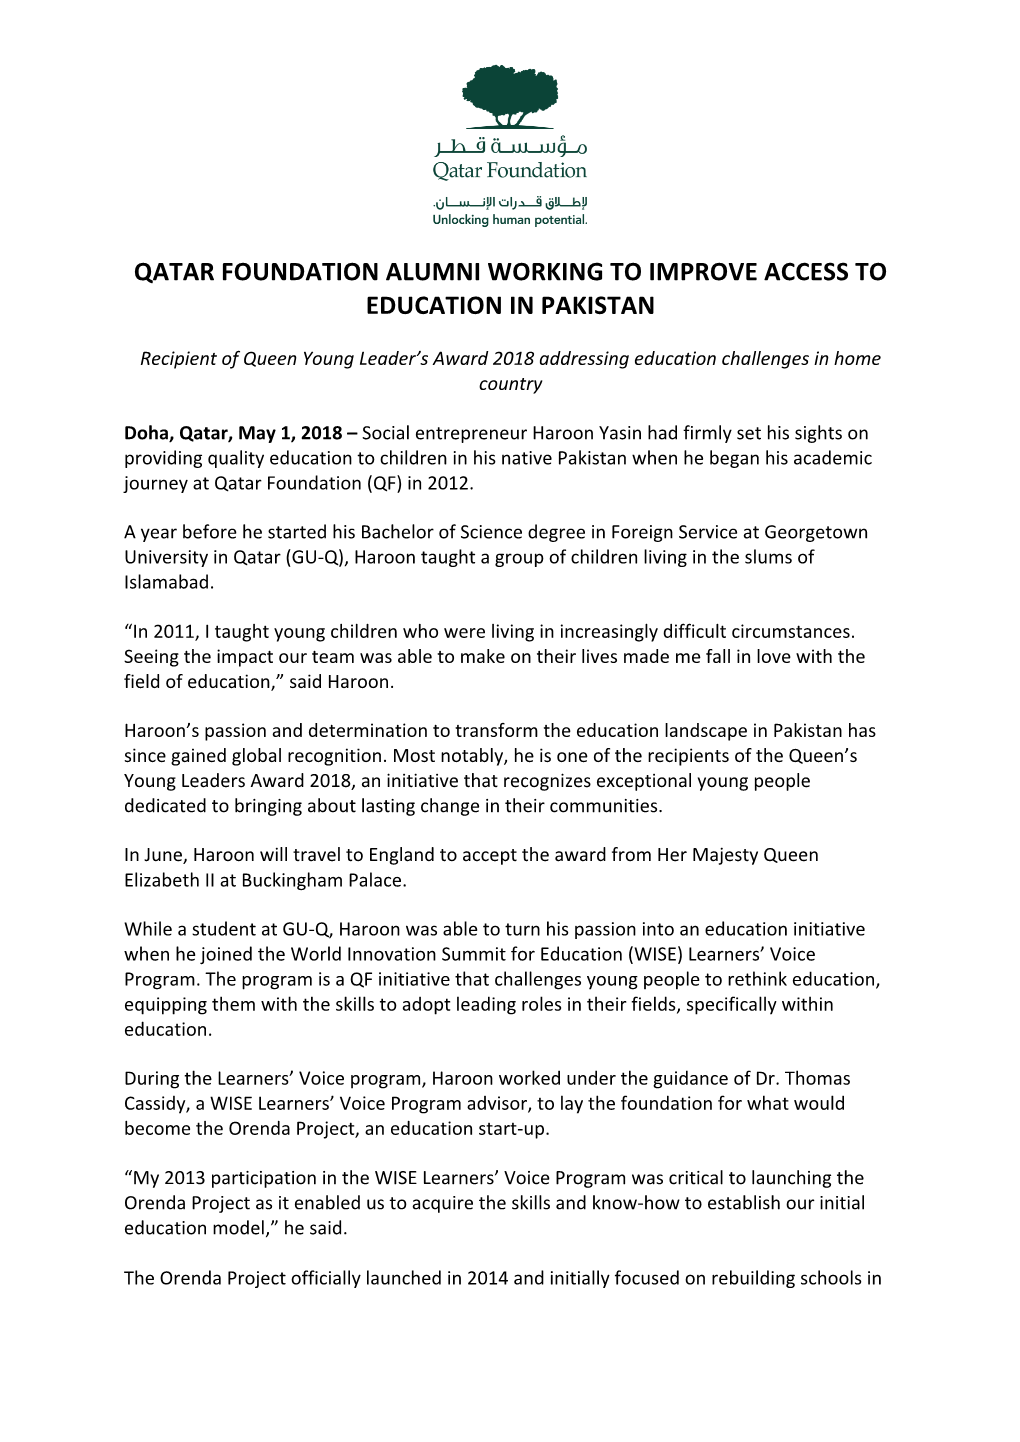 Qatar Foundation Alumni Working to Improve Access to Education in Pakistan